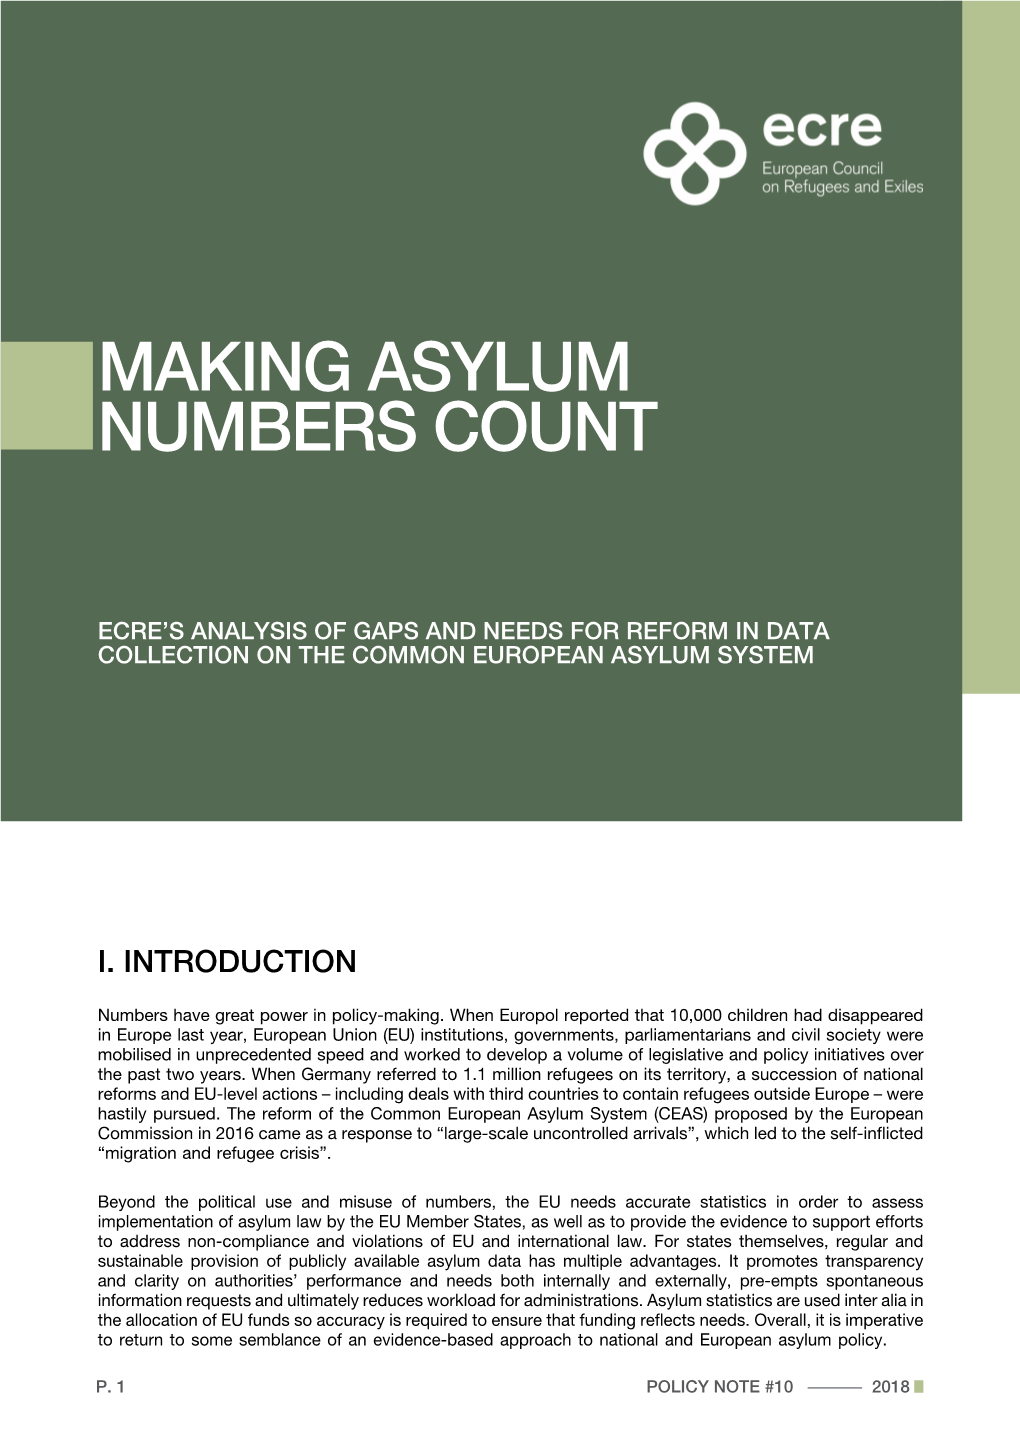 Policy Note: Making Asylum Numbers Count